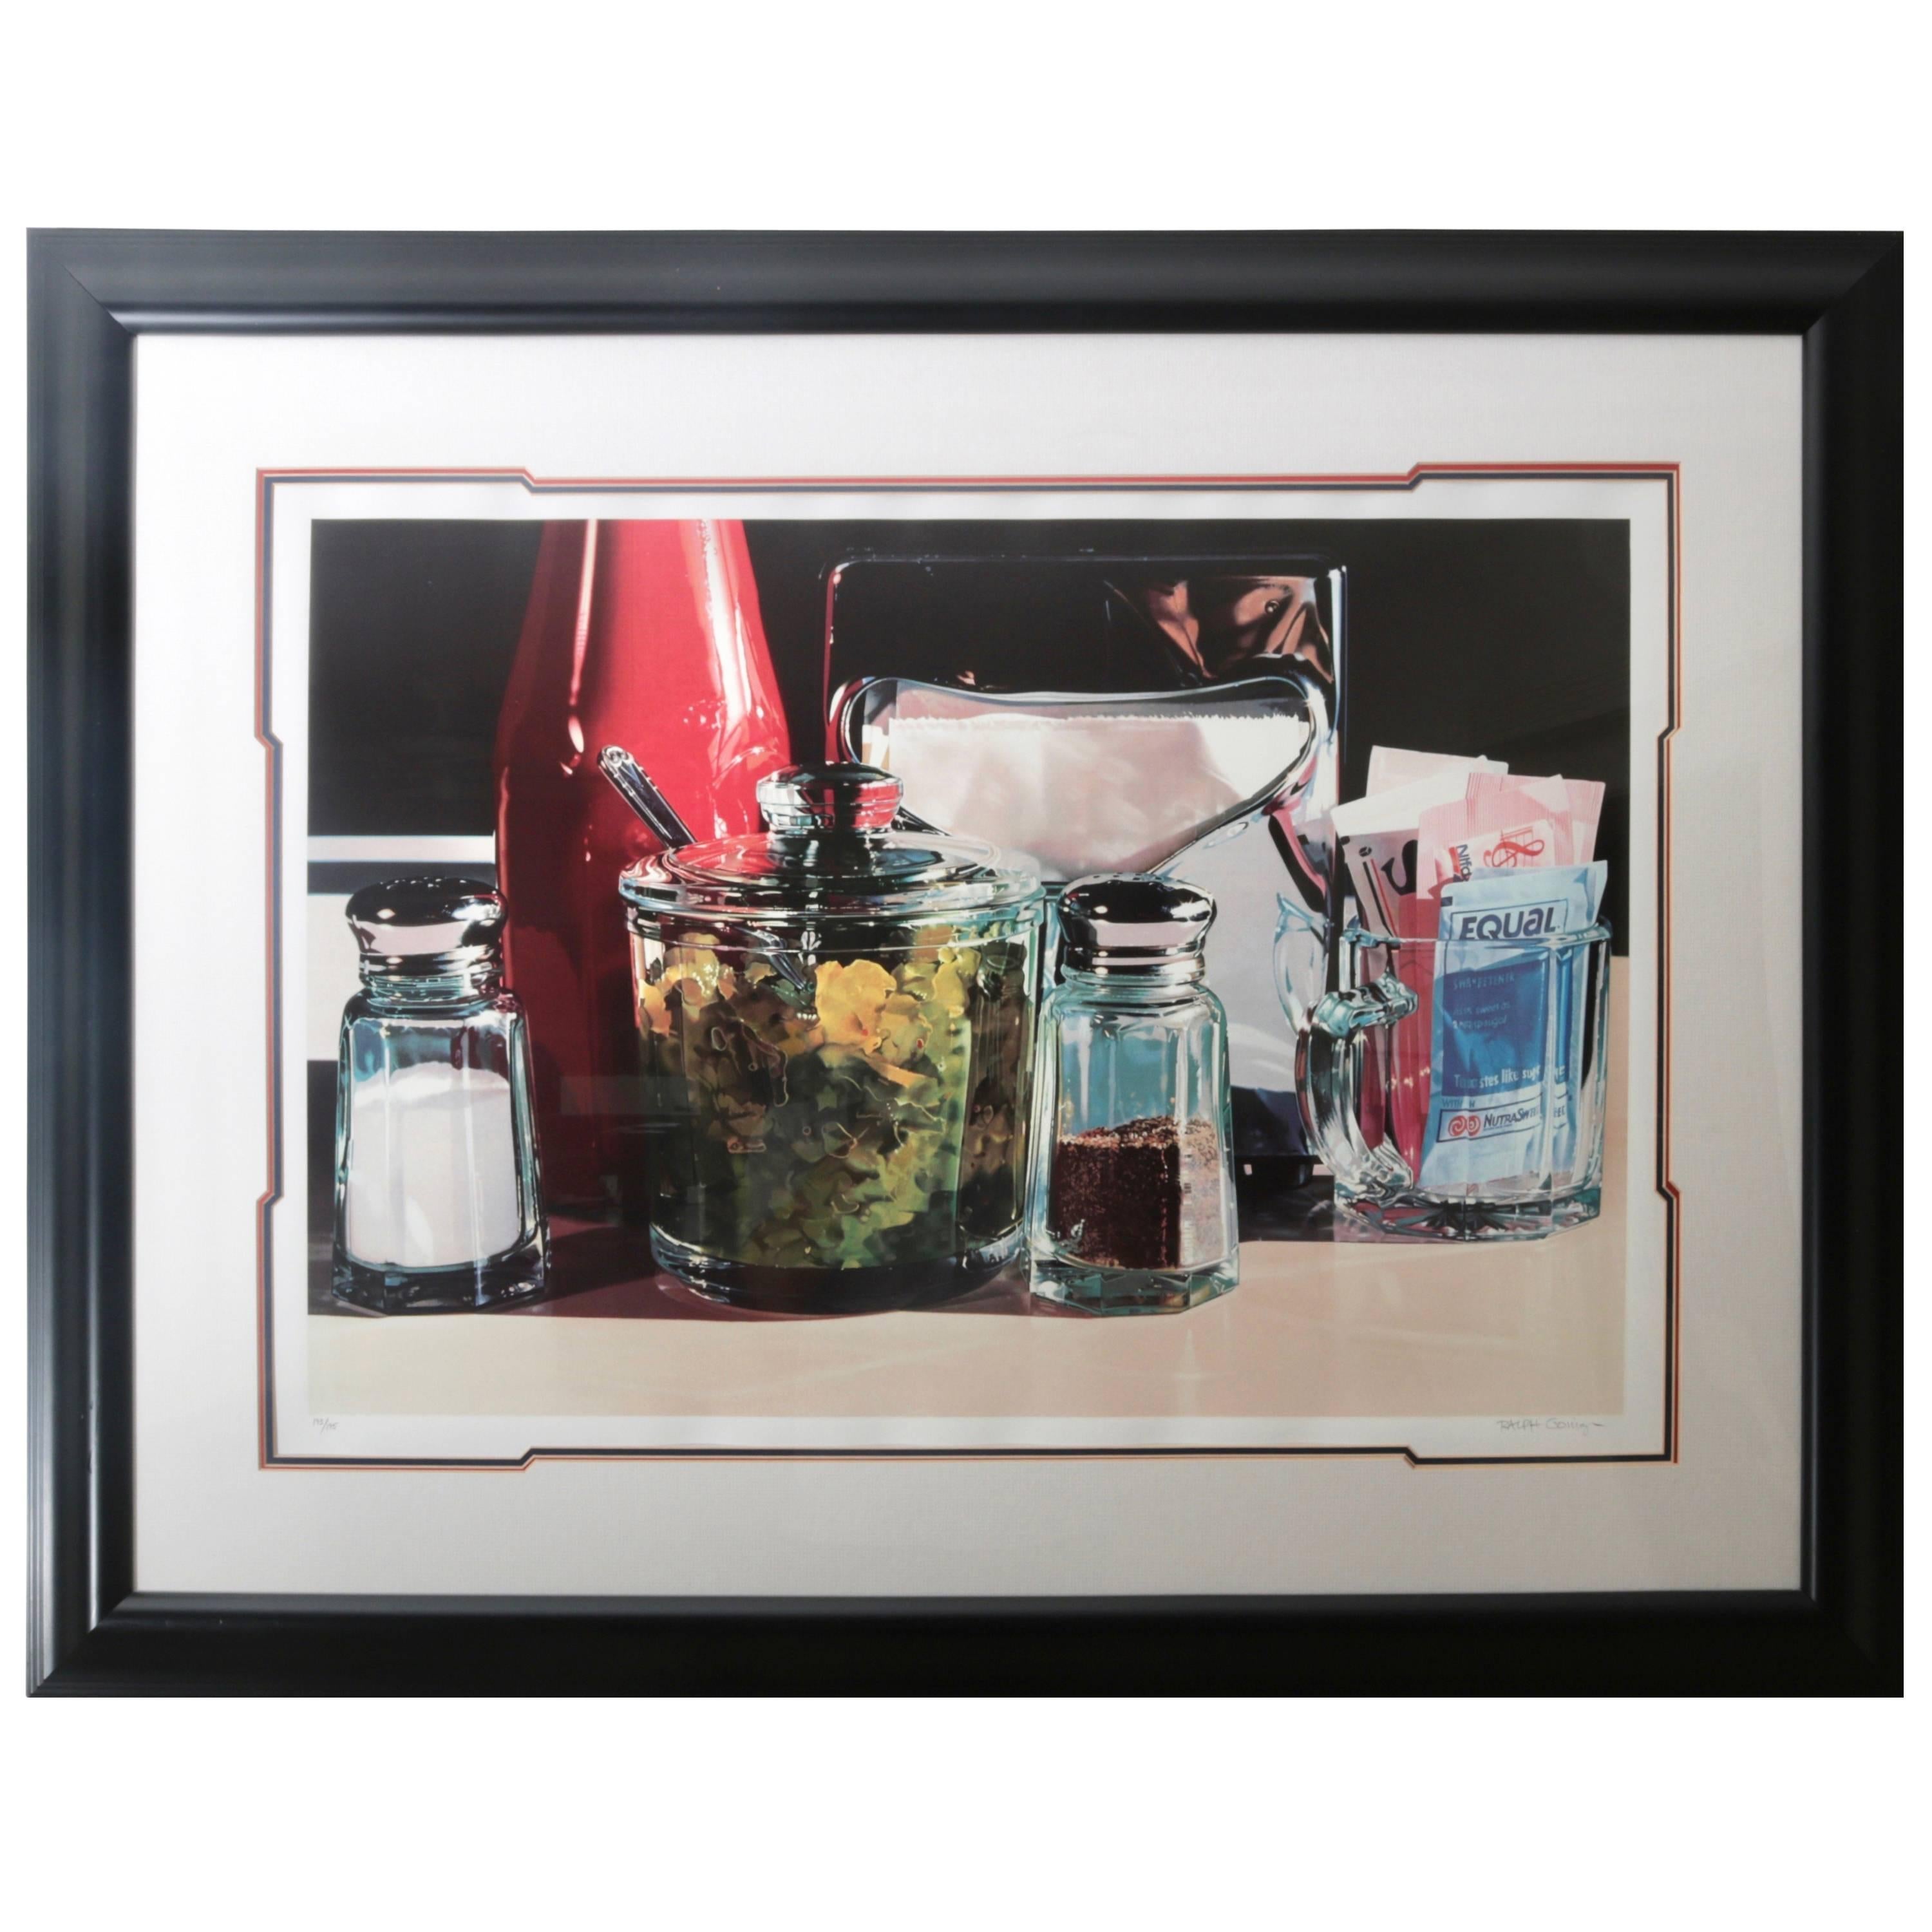 Framed Lithograph Still Life of an American Diner Table Scape by Ralph Goings